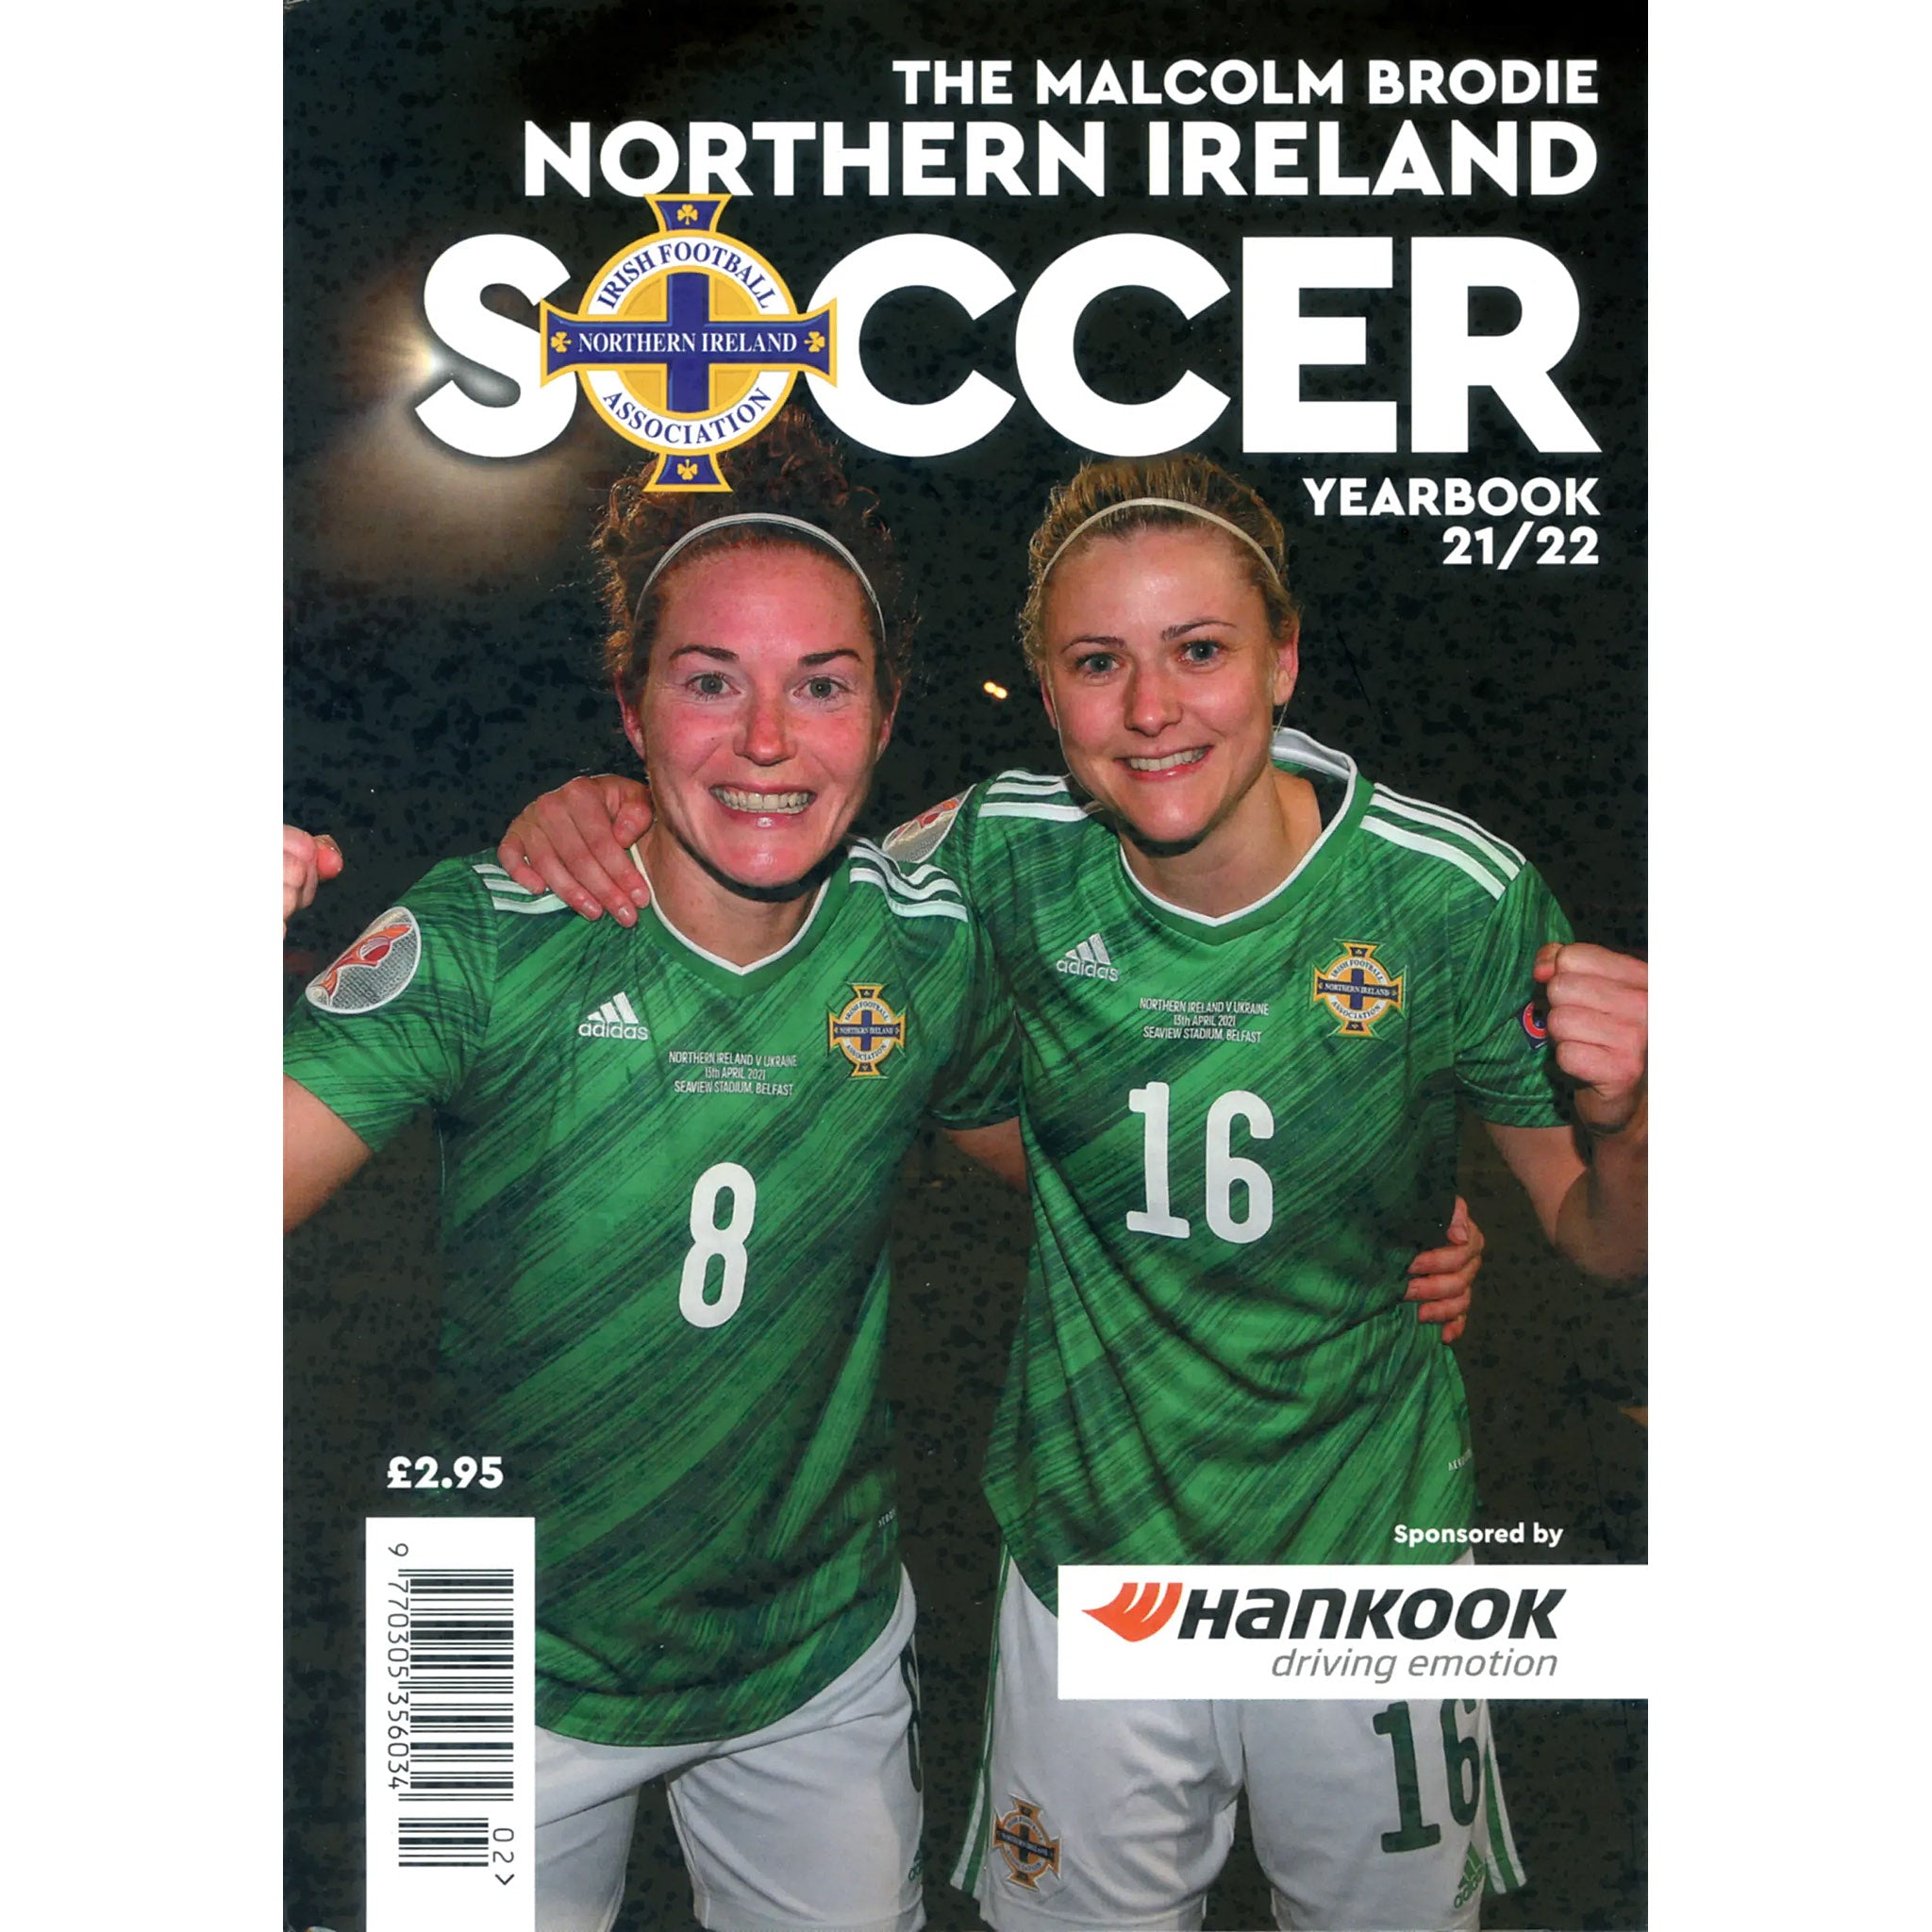 The Malcolm Brodie Northern Ireland Soccer Yearbook 21/22